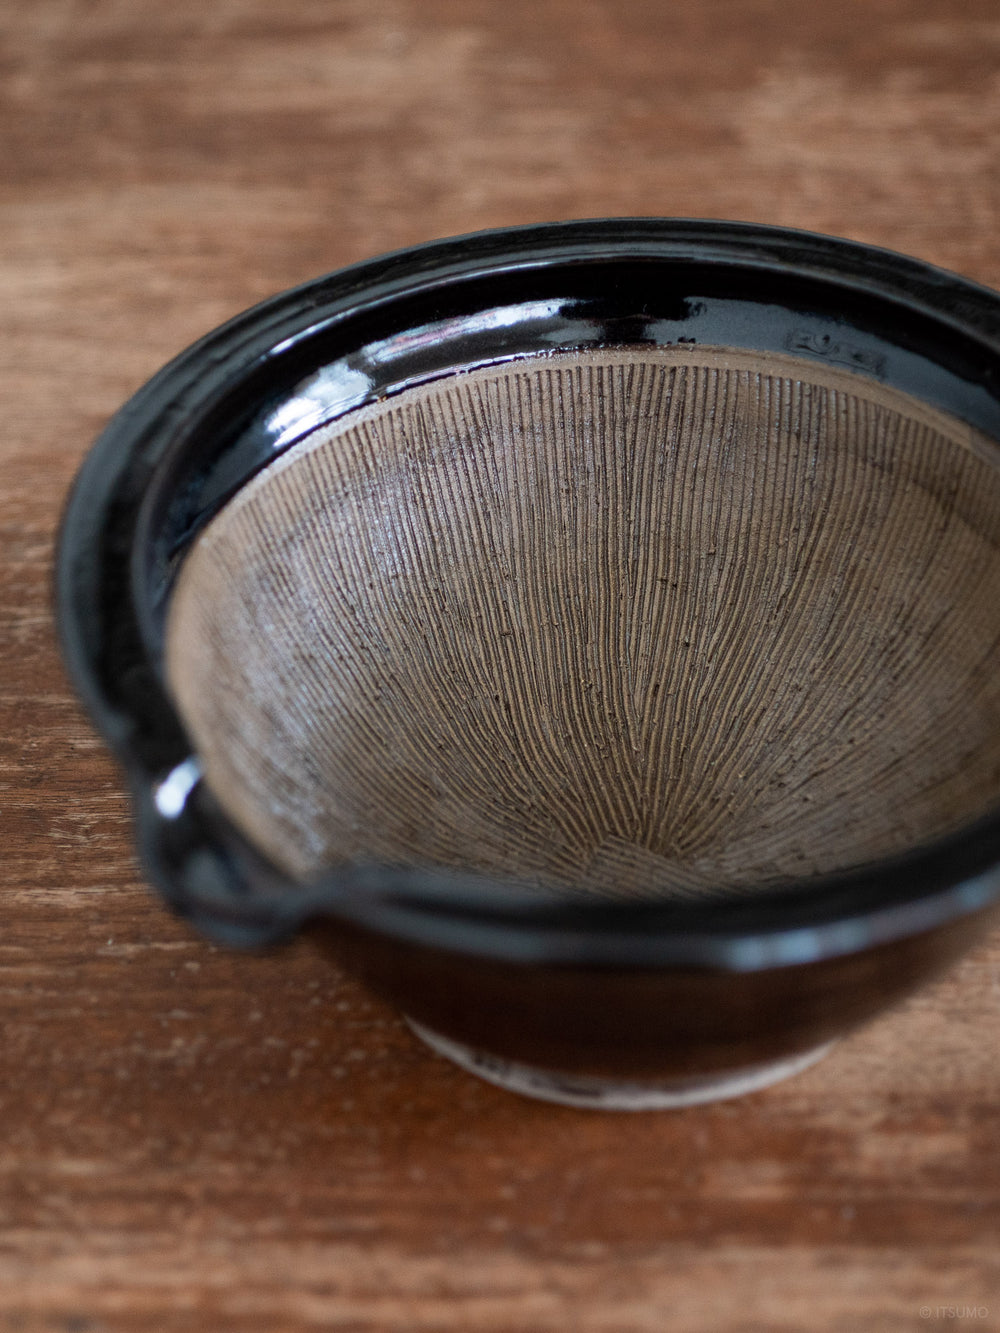 Inside of iga suribachi mortar showing textured lines, made using iga-ware pottery techniques in Japan